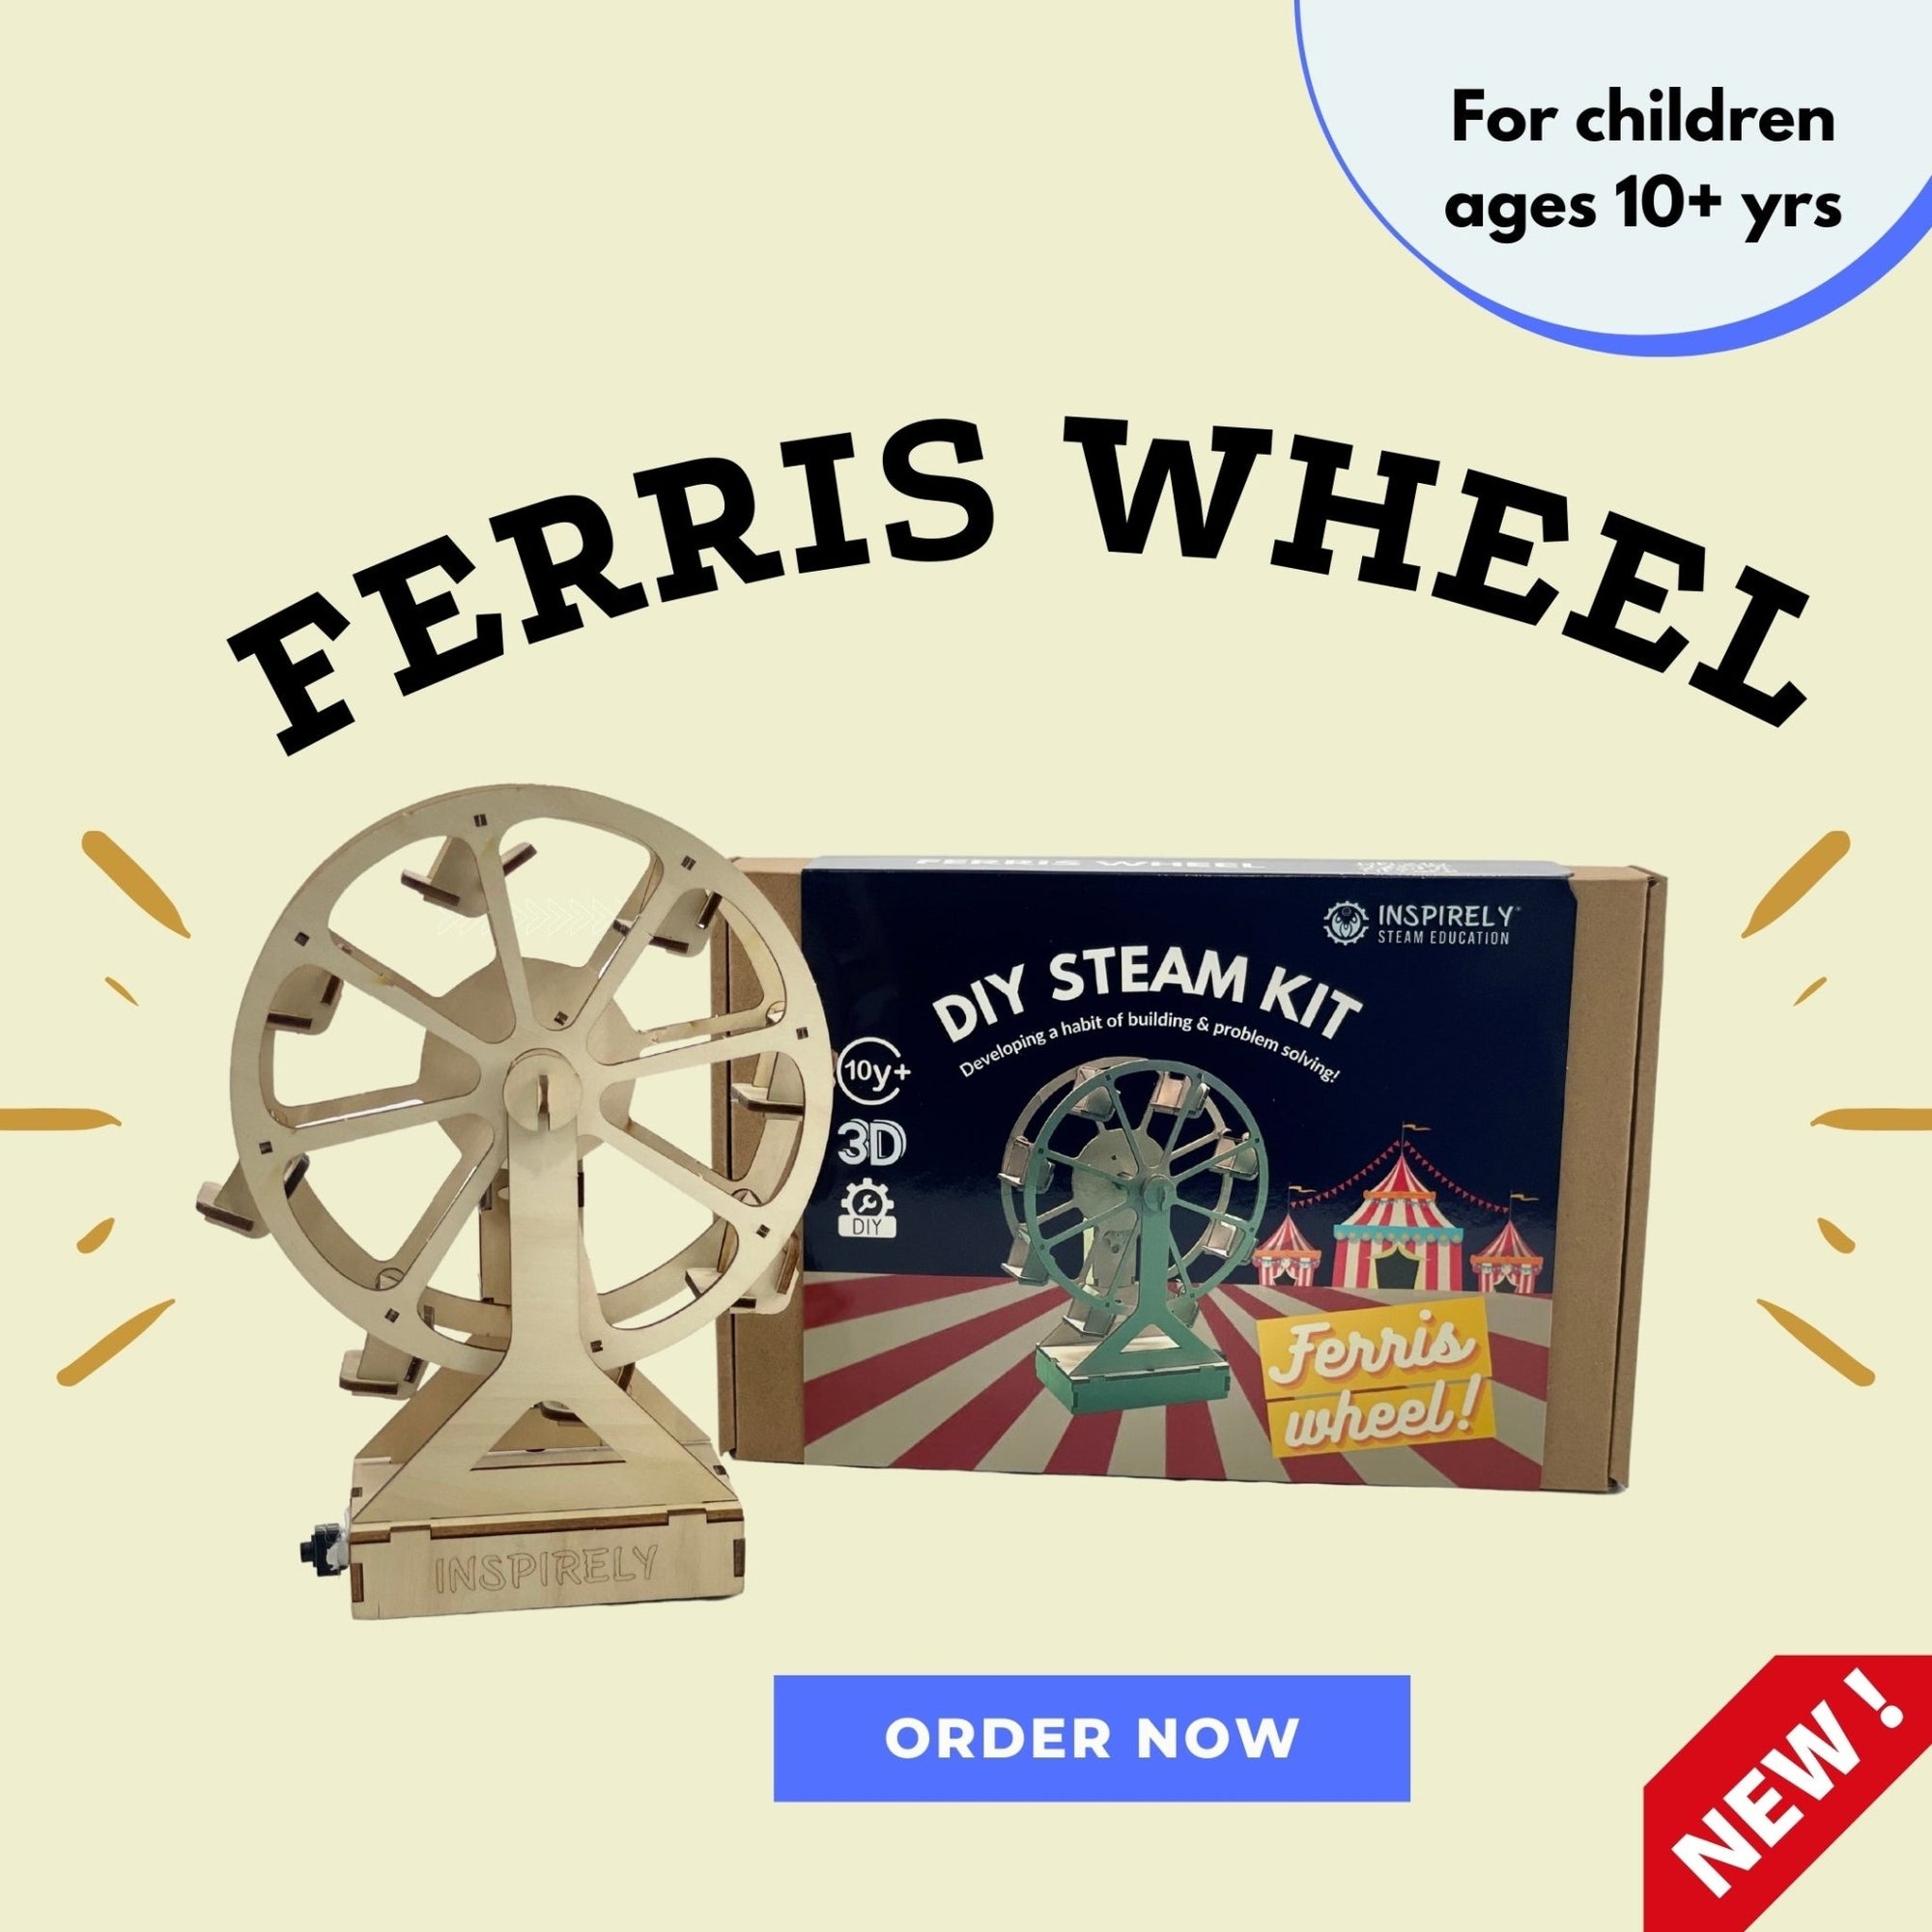 DIY Ferris Wheel - STEM / STEAM / Excellent Science Kit | Holiday Christmas Corporate Gift for family | Ages 6-99 years - Inspirely | STEAM Education corporate holiday birthday Christmas gift for employees with family growth mindset problem solving grit perseverance creative creativity attitude joy science school project STEM STEAM Kits activity box Building Art Kit Craft workshop Kid boy girl wooden math subscription educational toy top best parent choice engineering science robotics 2022 parent choice